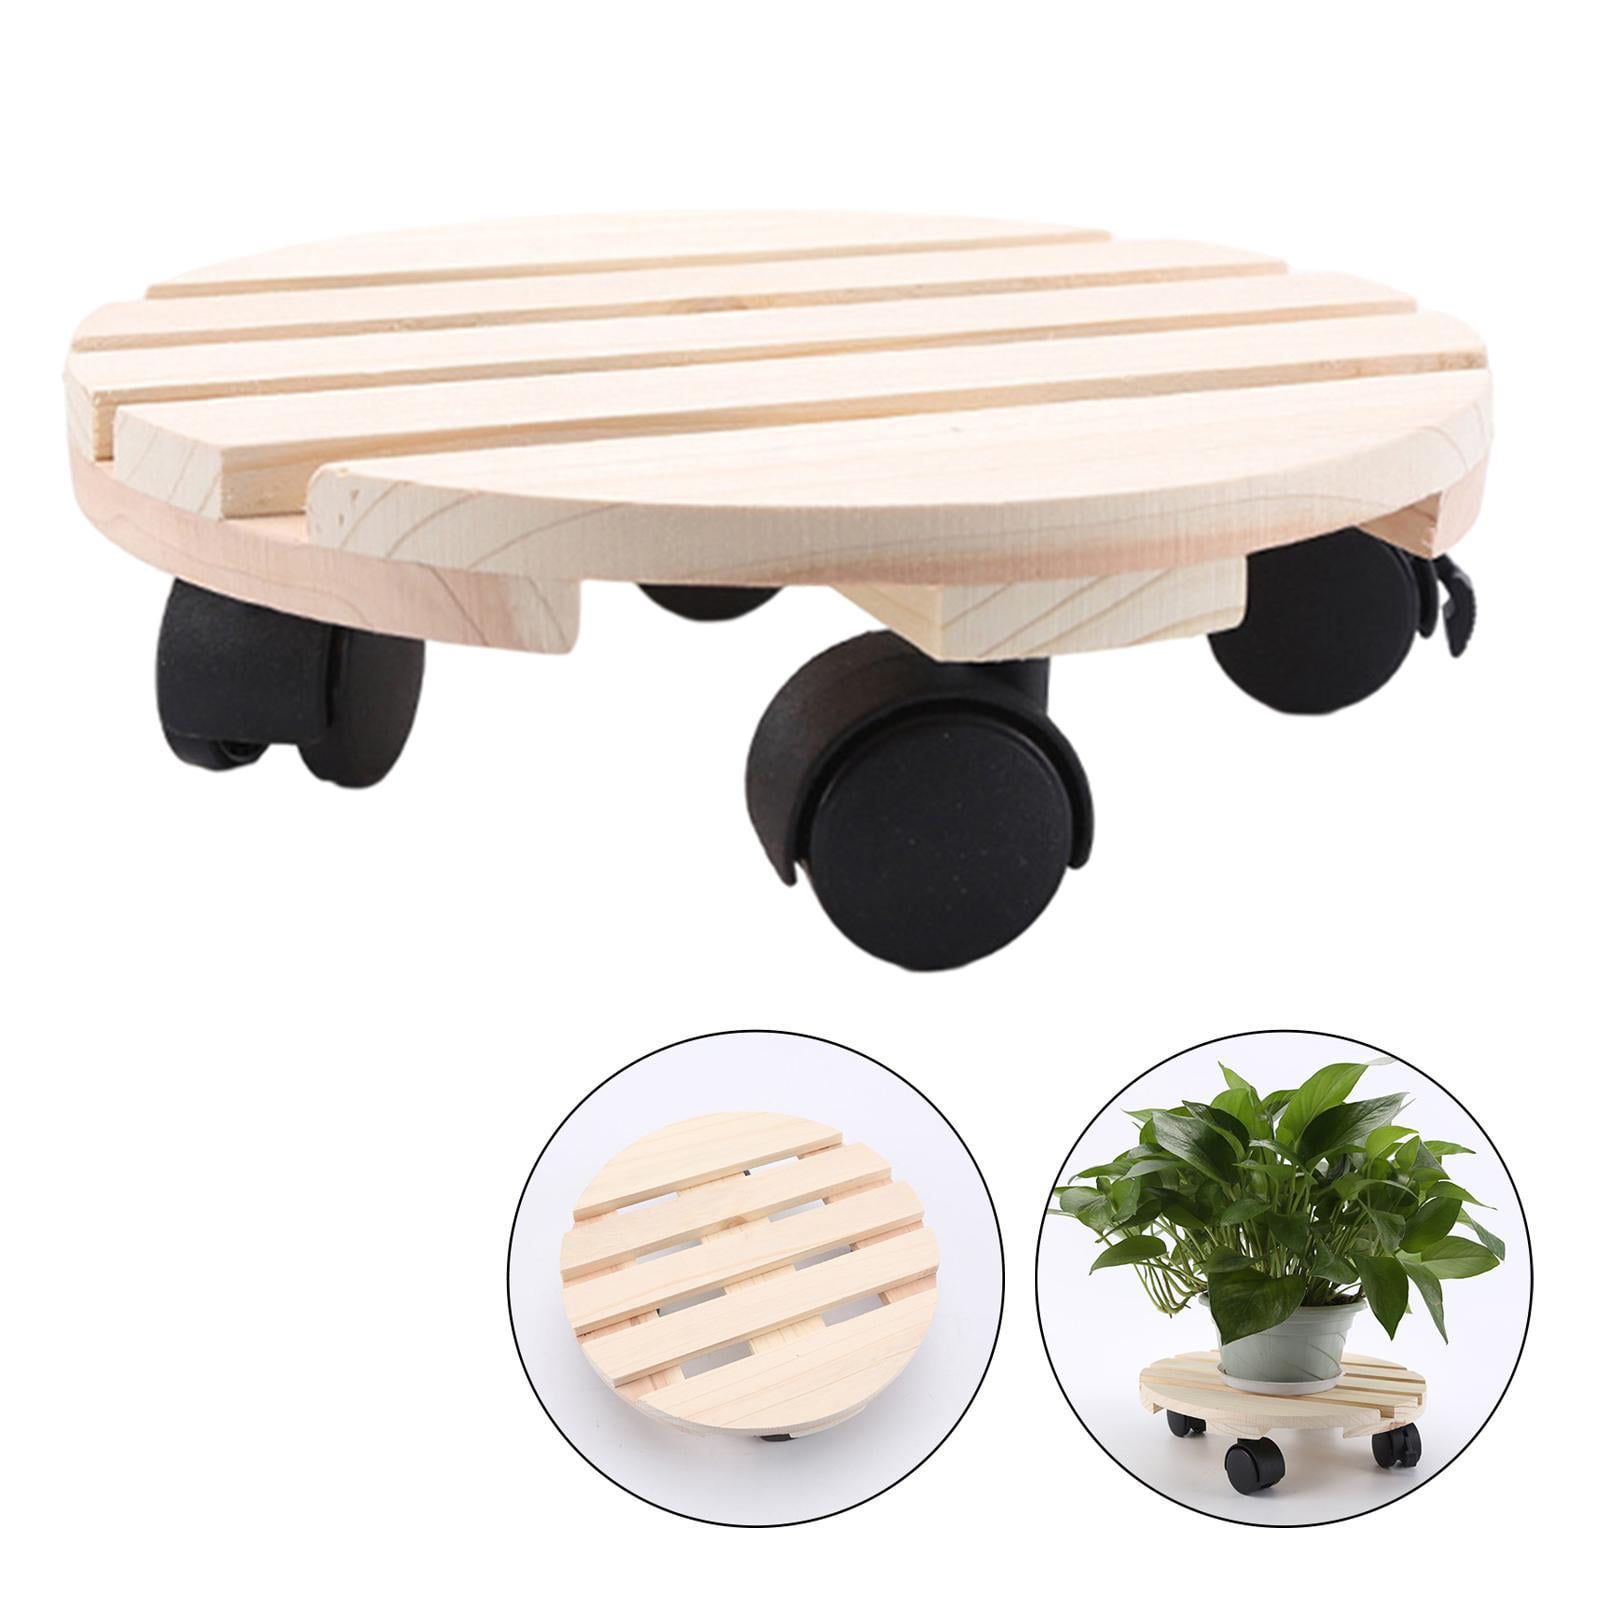 GuTen 16/40cm Rolling Wooden Planter Caddy Potted Plant Stand With Wheels Round Flower Pot Rack Indoor Outdoor Planter Trolley with 360° Rotating Casters Rolling Tray Coaster Garden Pot Dolly